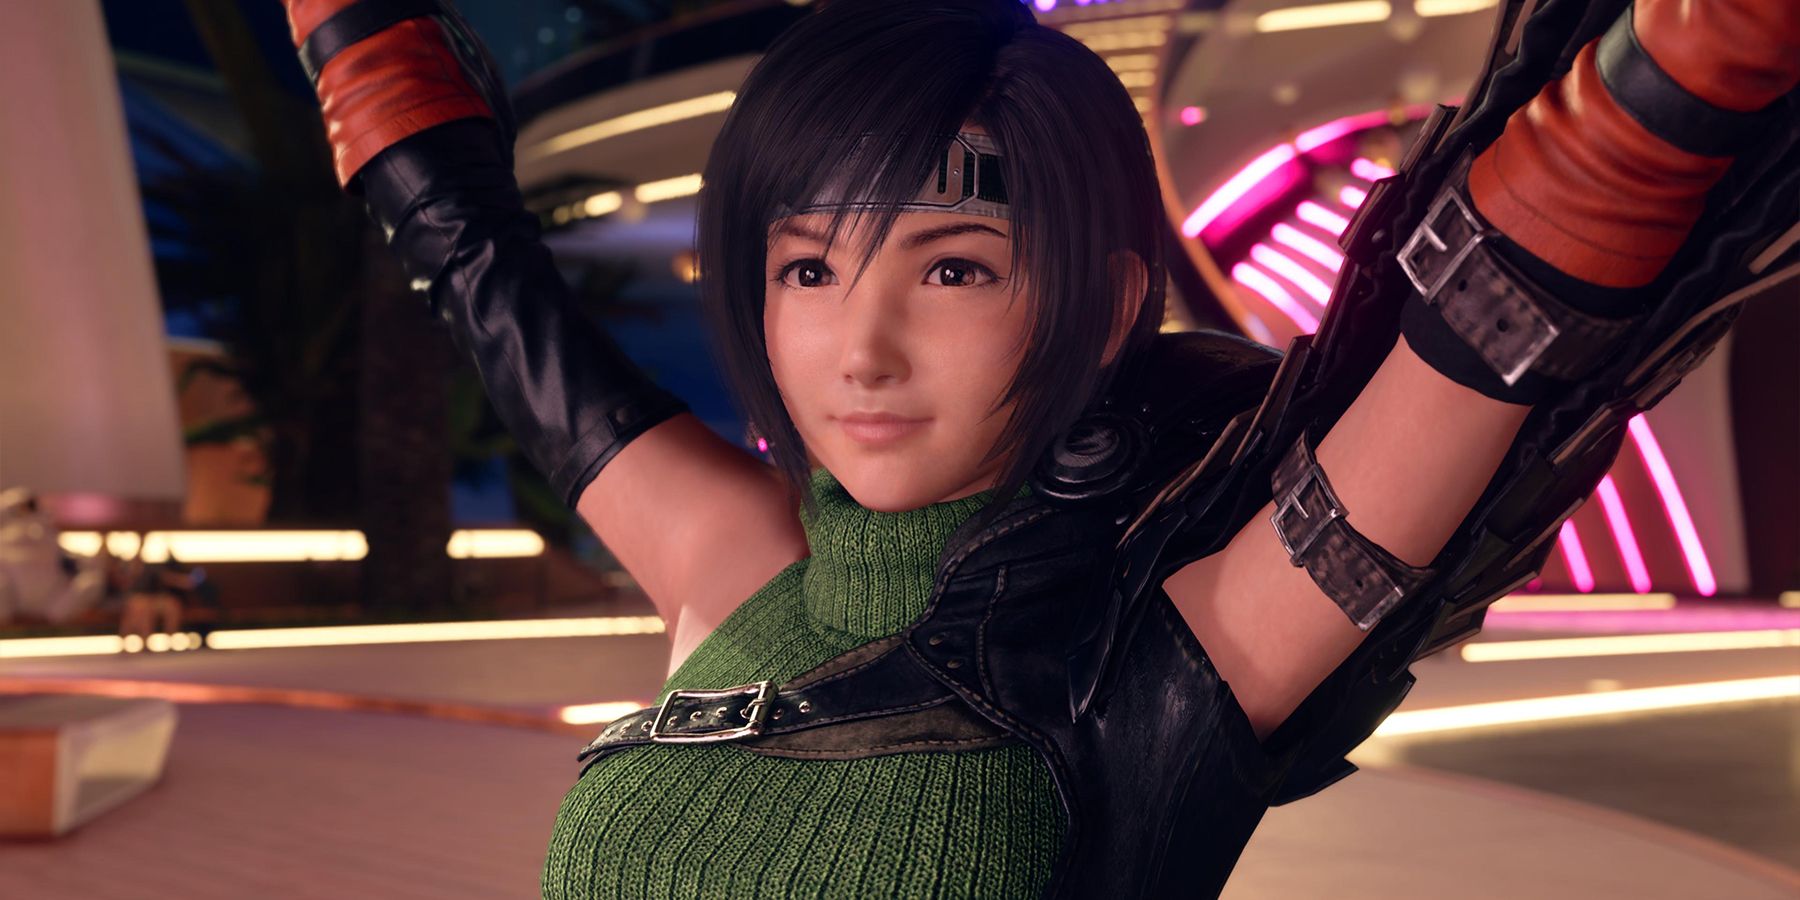 Yuffie with arms raised in Final Fantasy 7 Rebirth